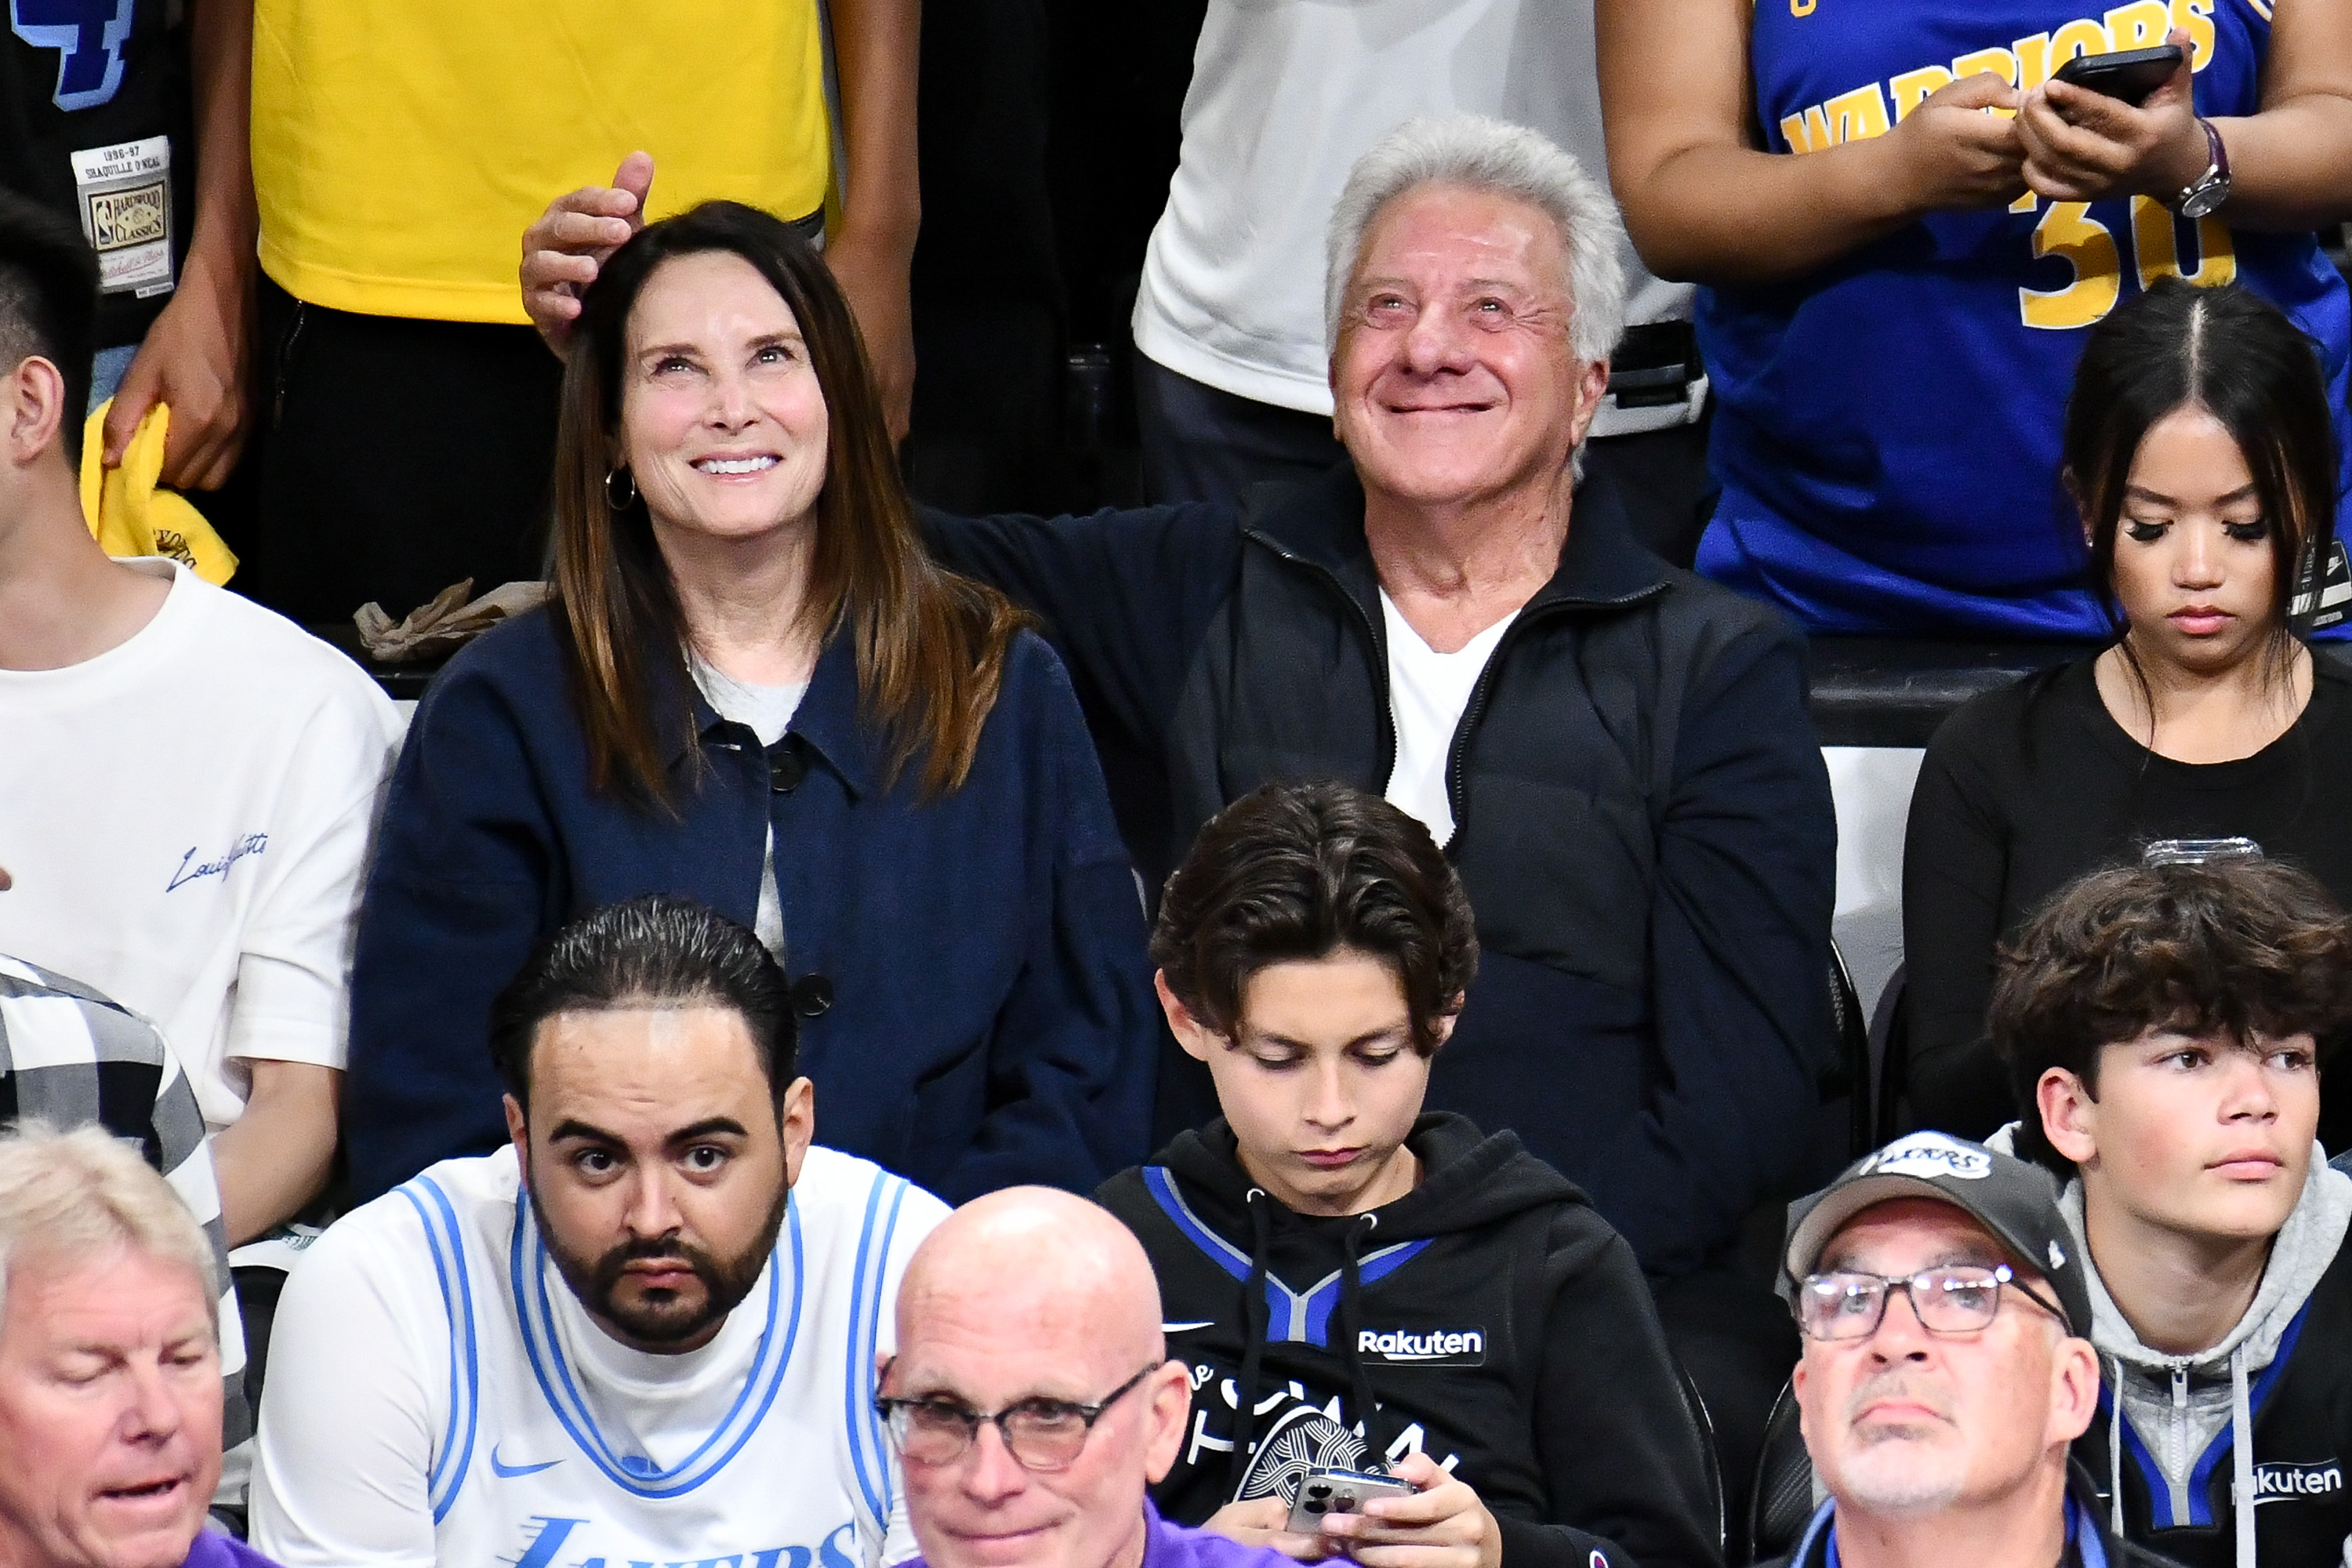 Dustin Hoffman and Lisa Hoffman attend a playoff basketball game.